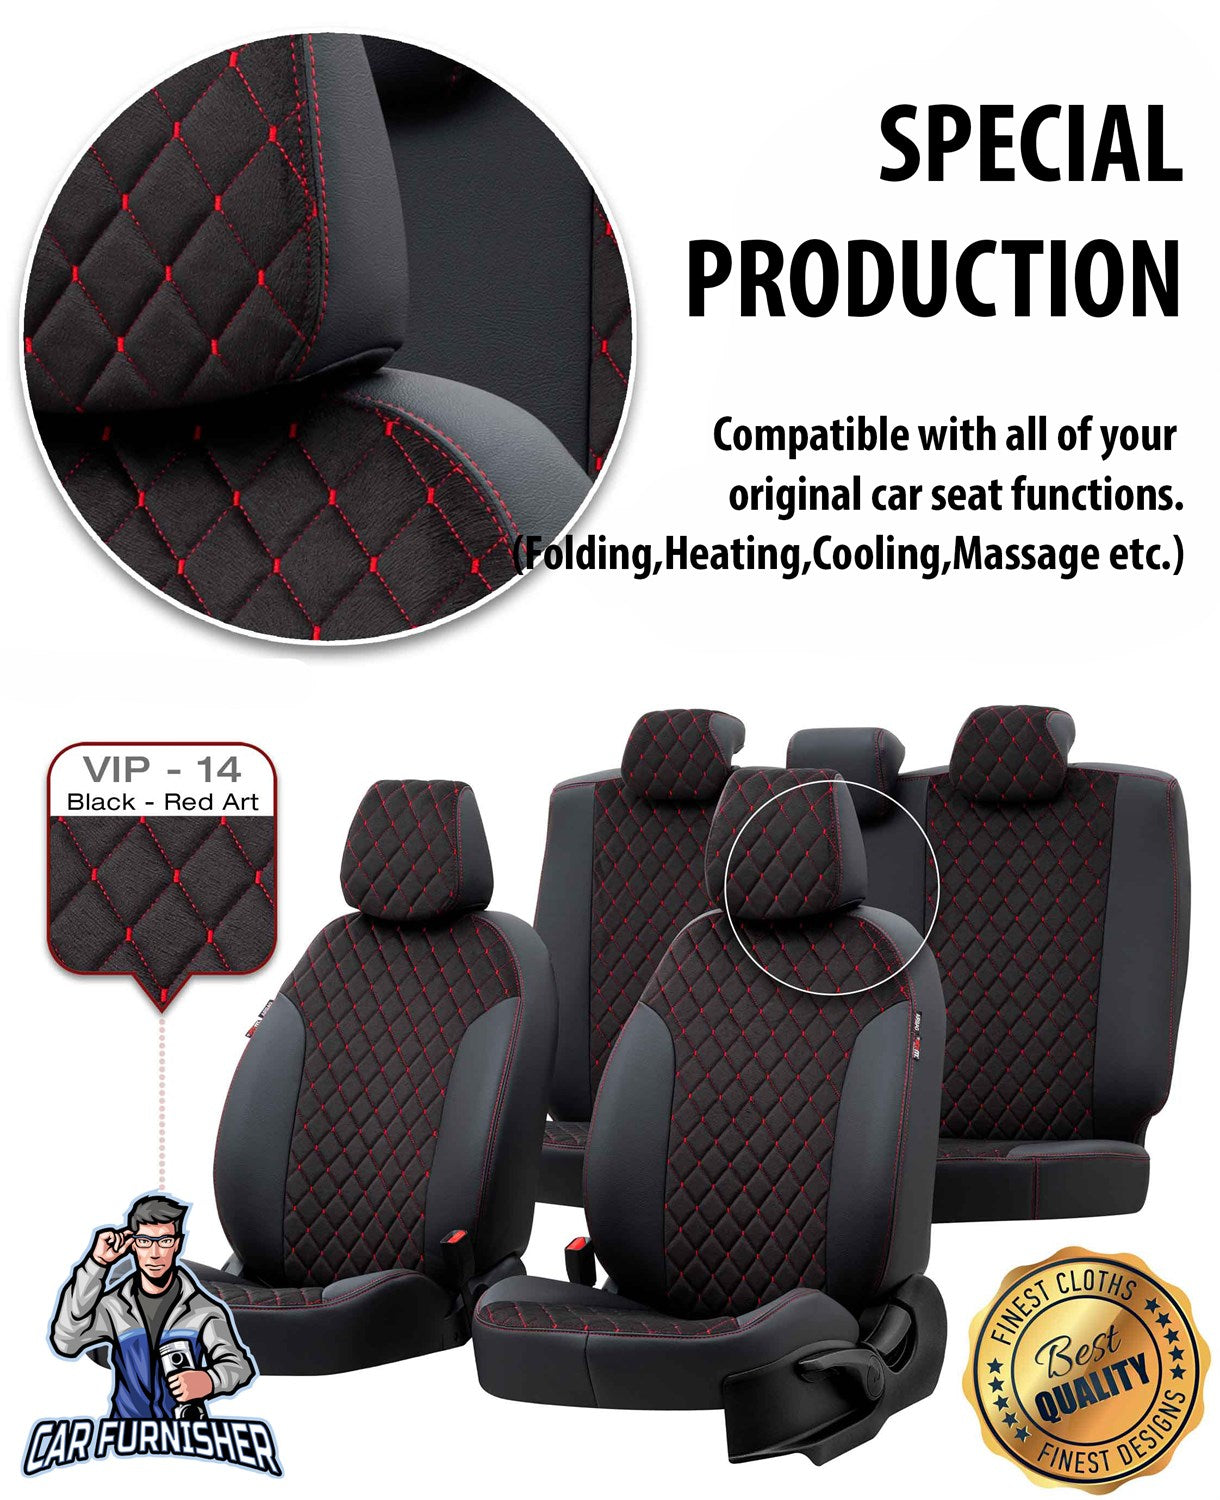 Toyota Corolla Seat Cover Madrid Foal Feather Design Dark Gray Leather & Foal Feather